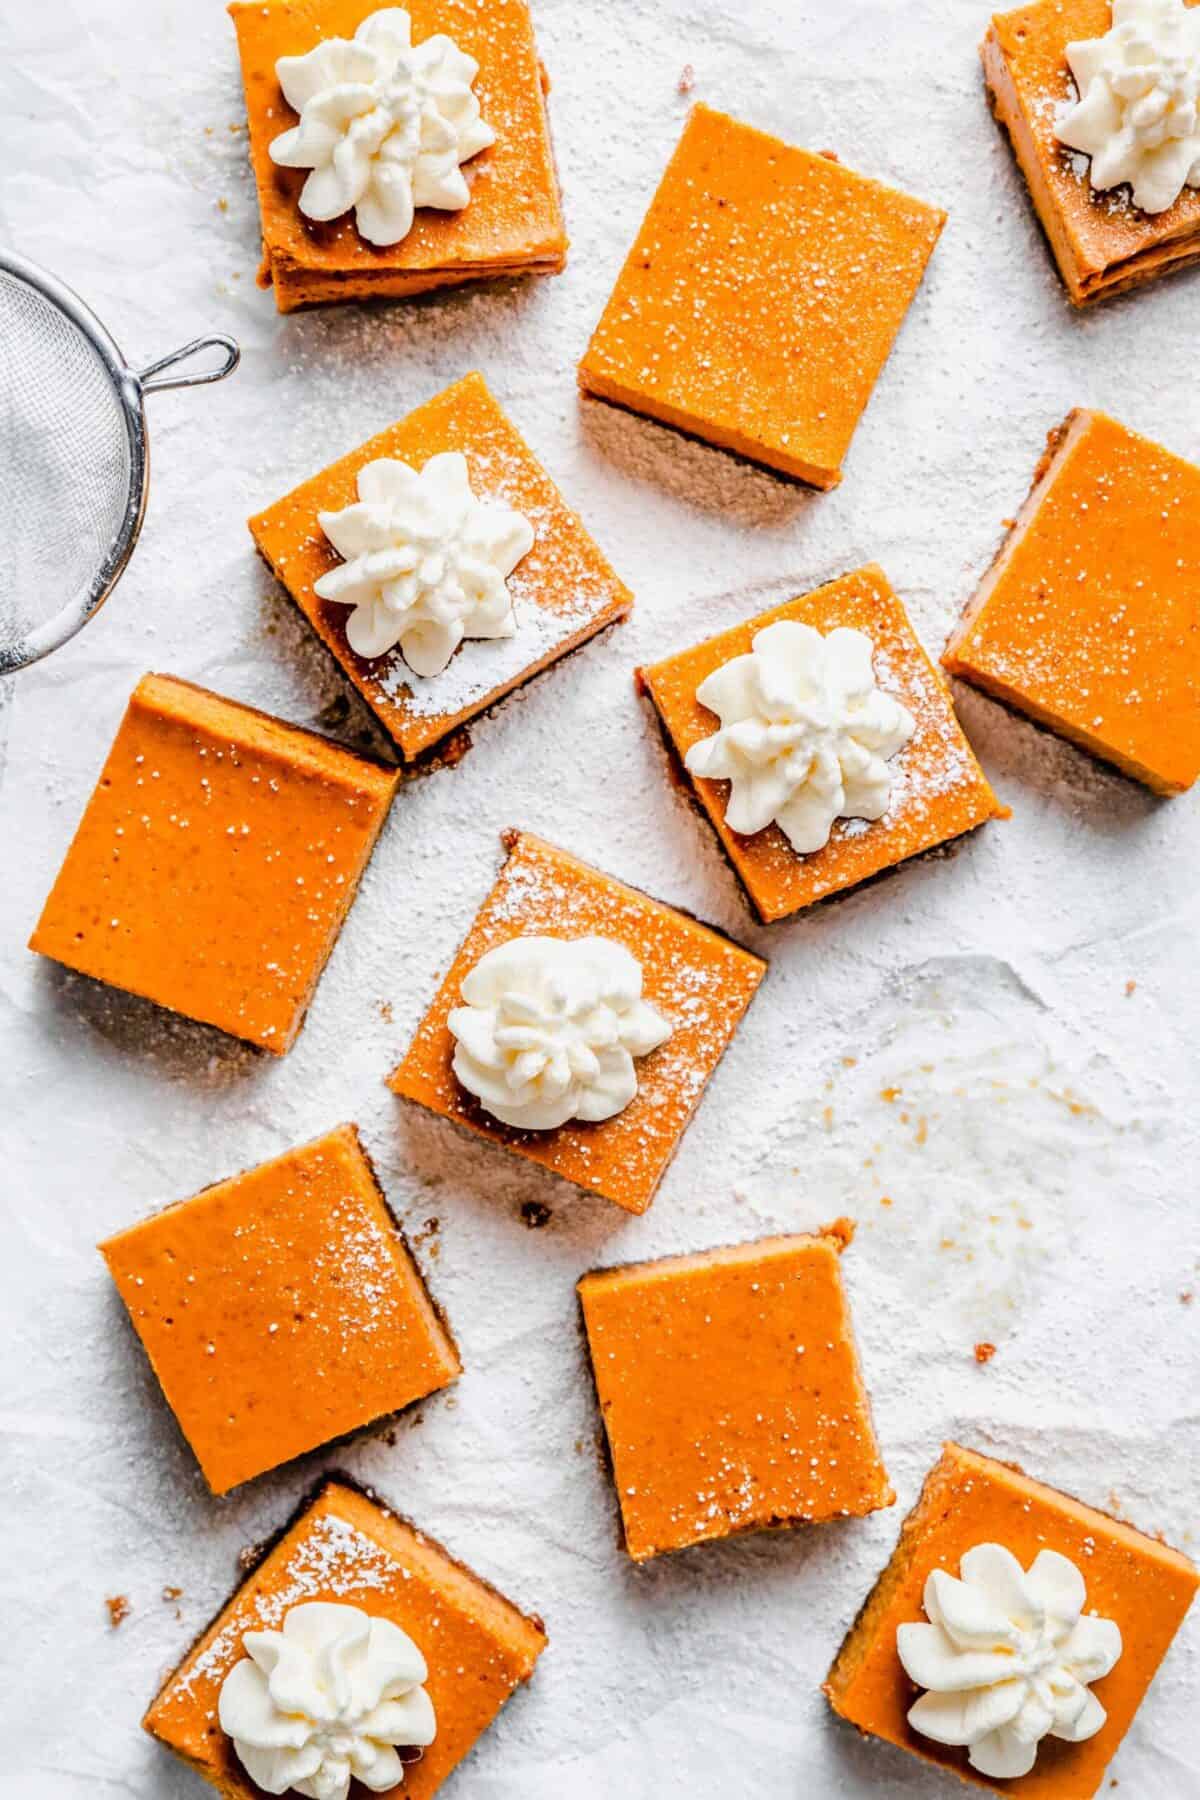 12 squares of maple pumpkin cheesecake bars, some with powdered sugar on top, some with dollops of whipped cream, surrounded by a sieve and powdered sugar